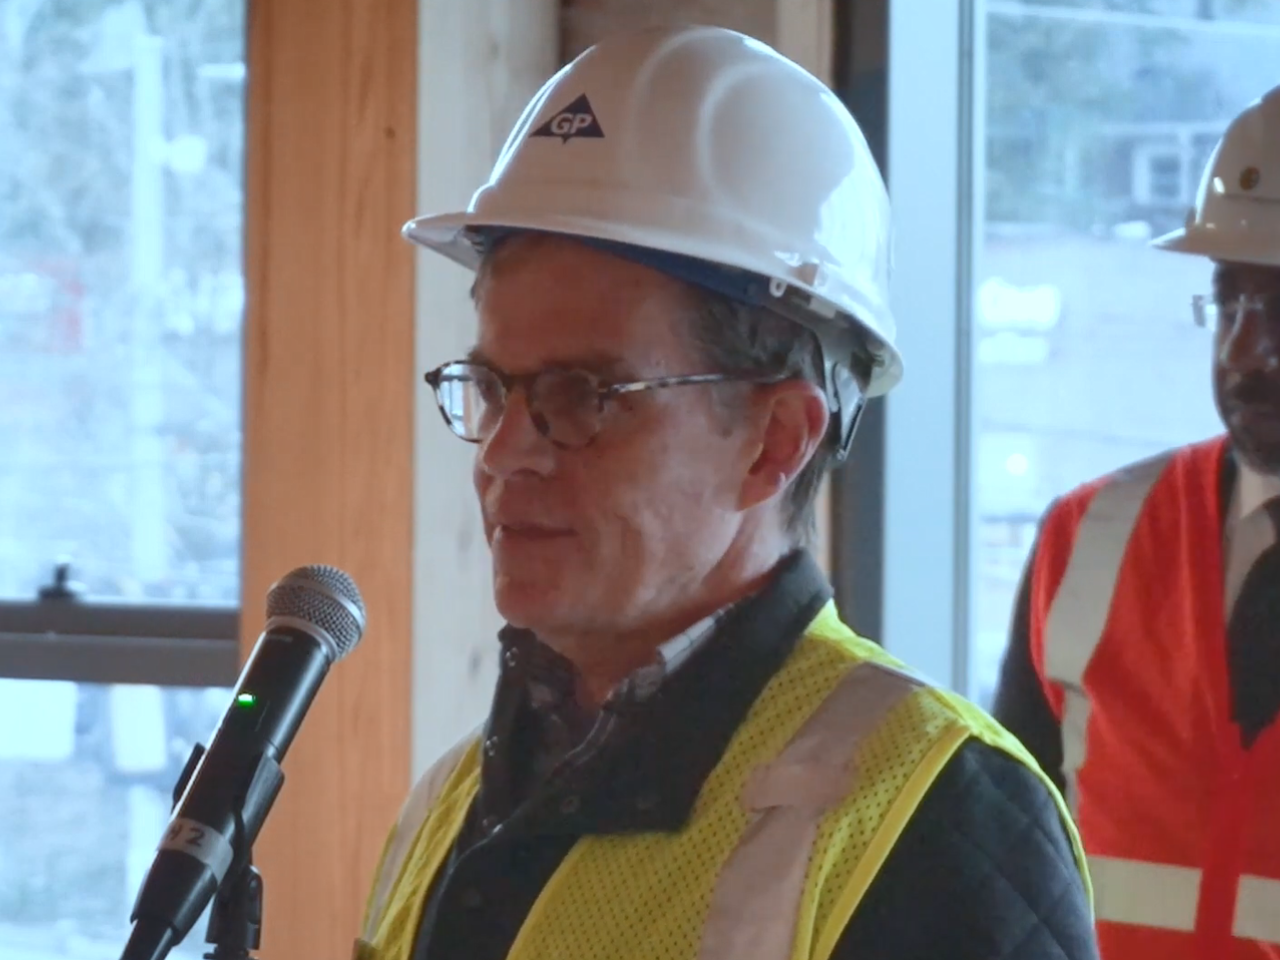 Georgia-Pacific Vice President of stewardship John Mulcahy give remarks on the economic impact of mass timber.